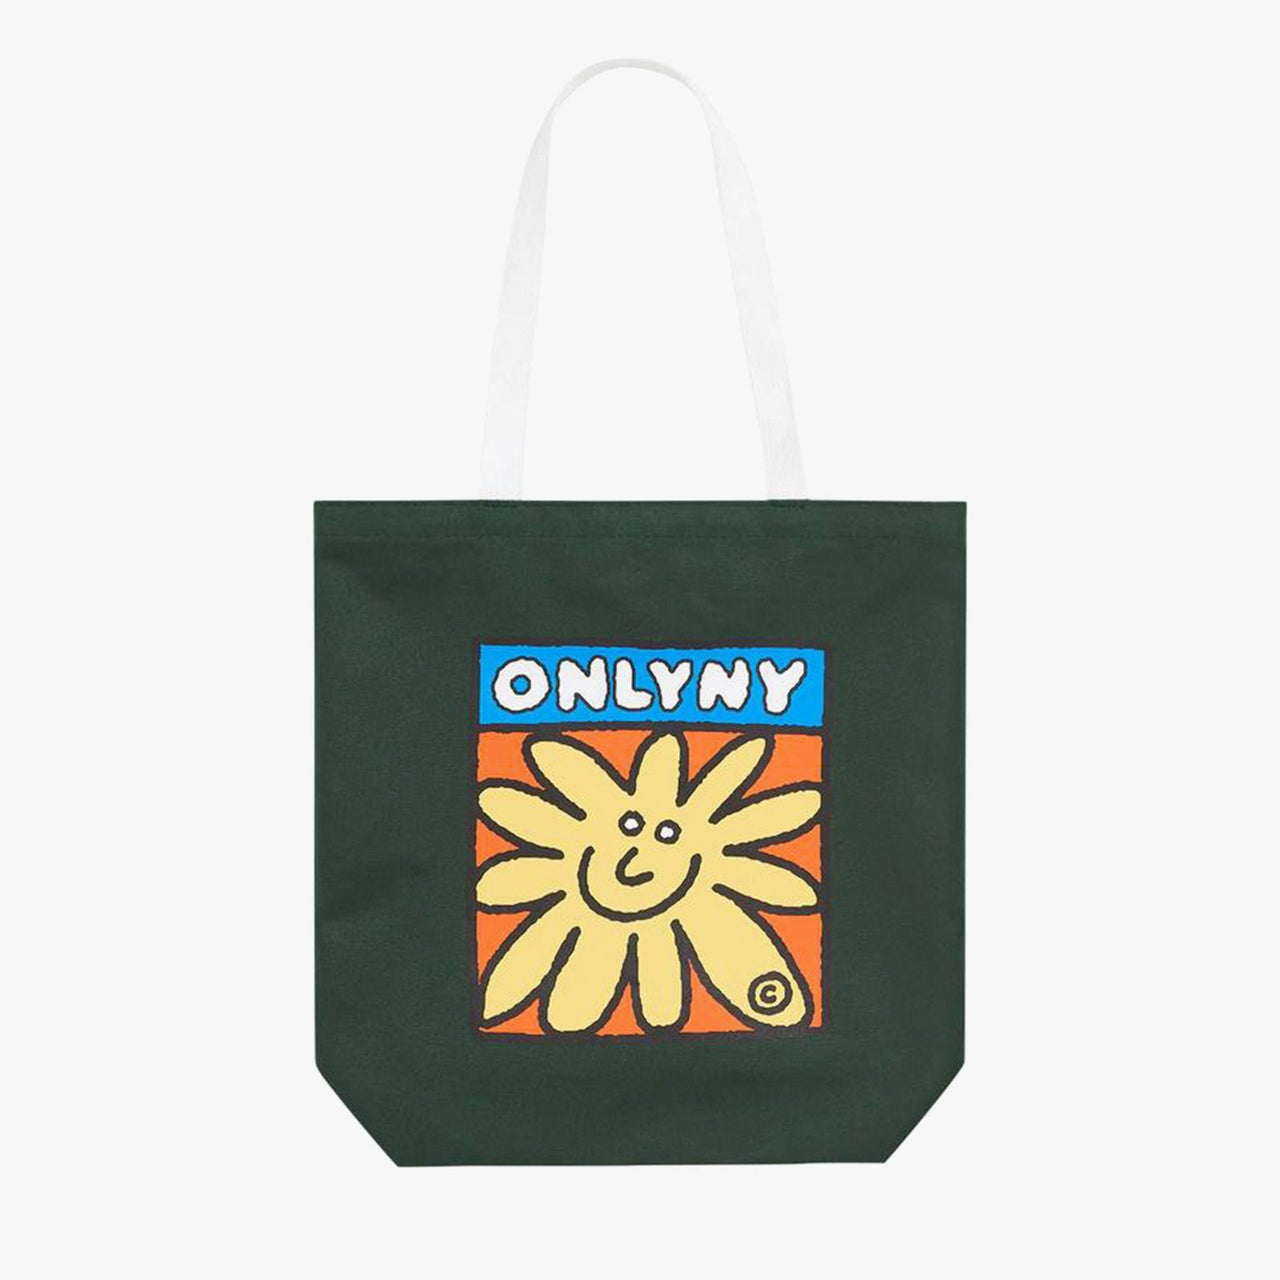 Only NY Tote Bag